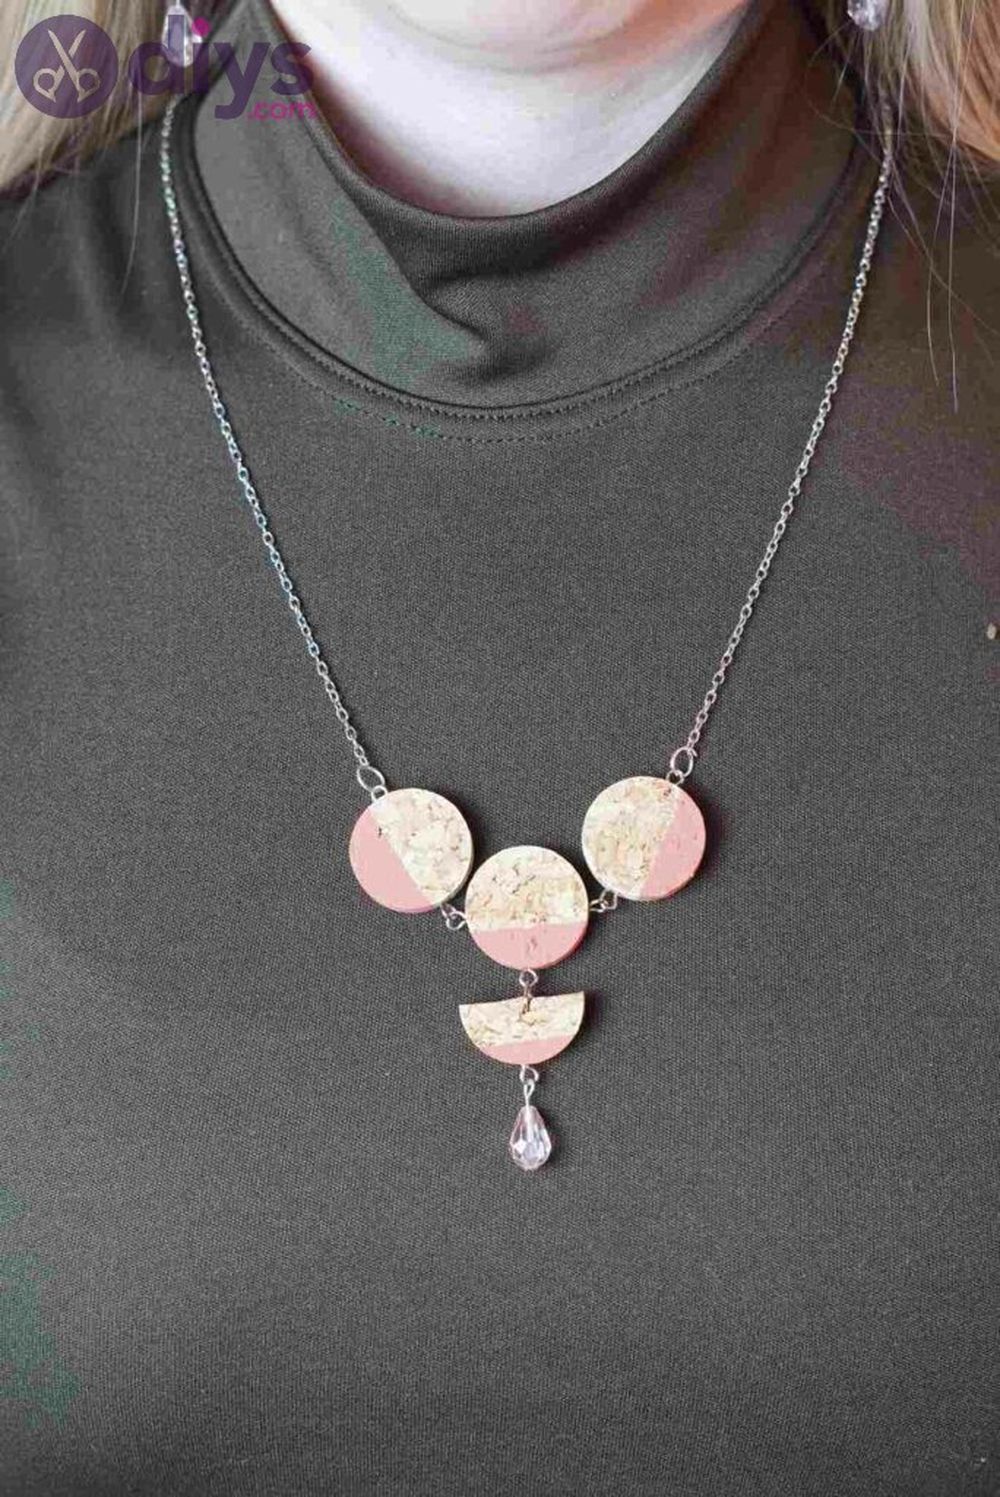 Diy wine cork necklace christmas presents for mom 